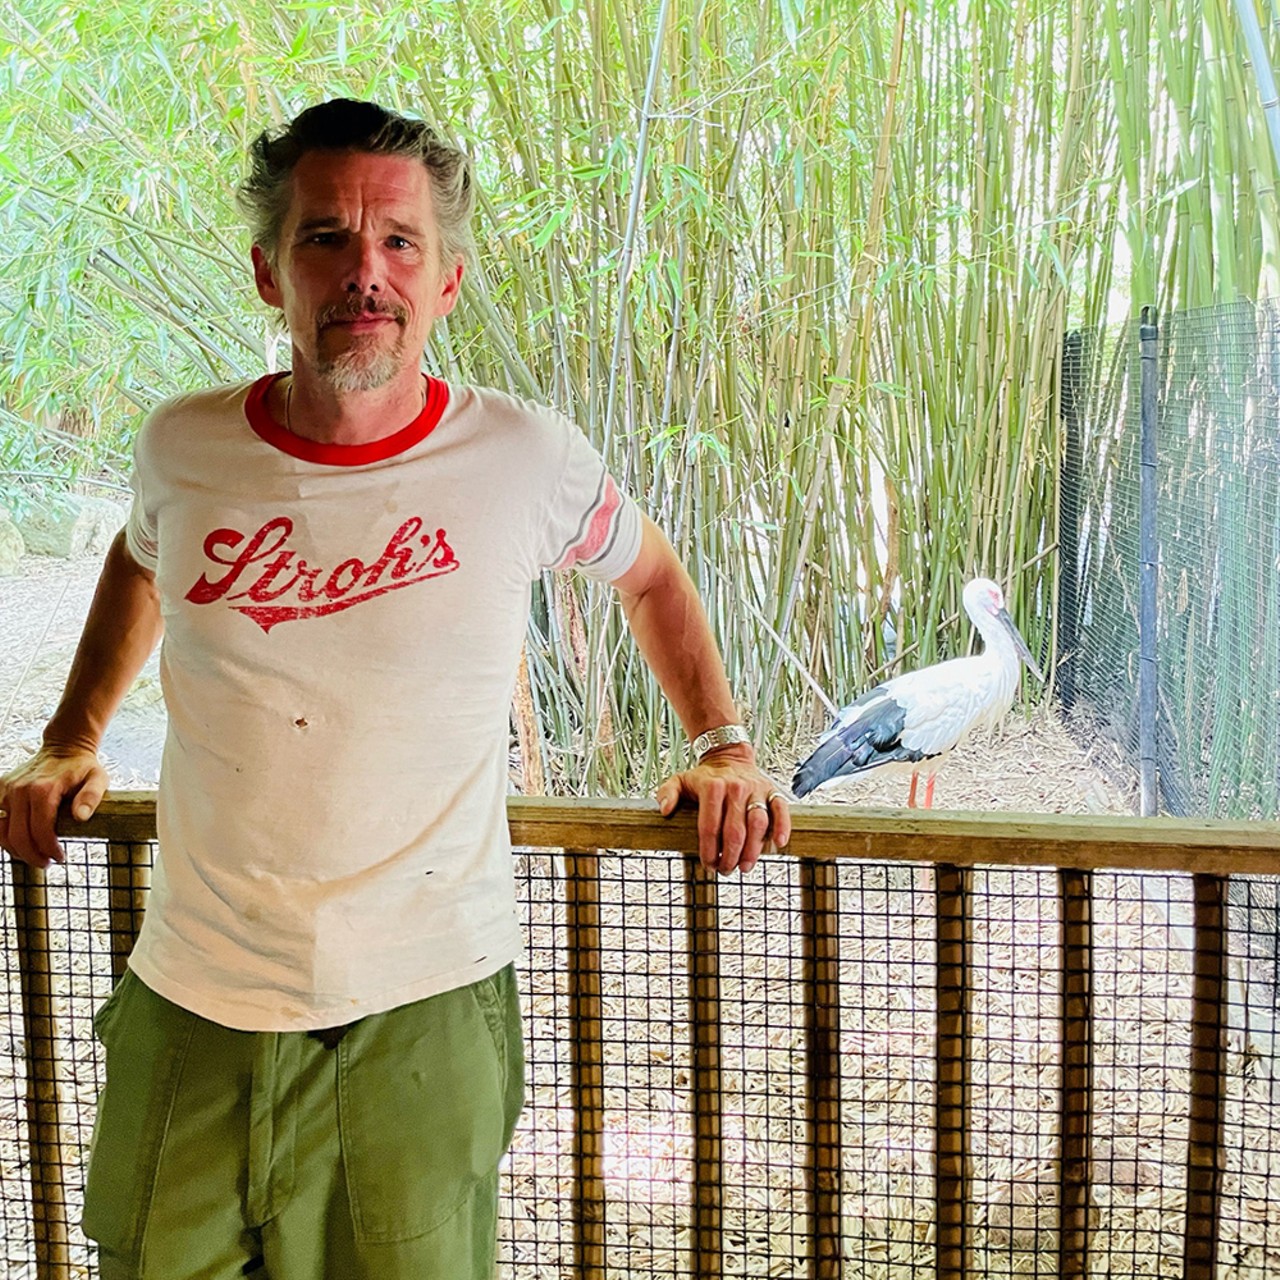 Actor/Director Ethan Hawke visits the Louisville Zoo